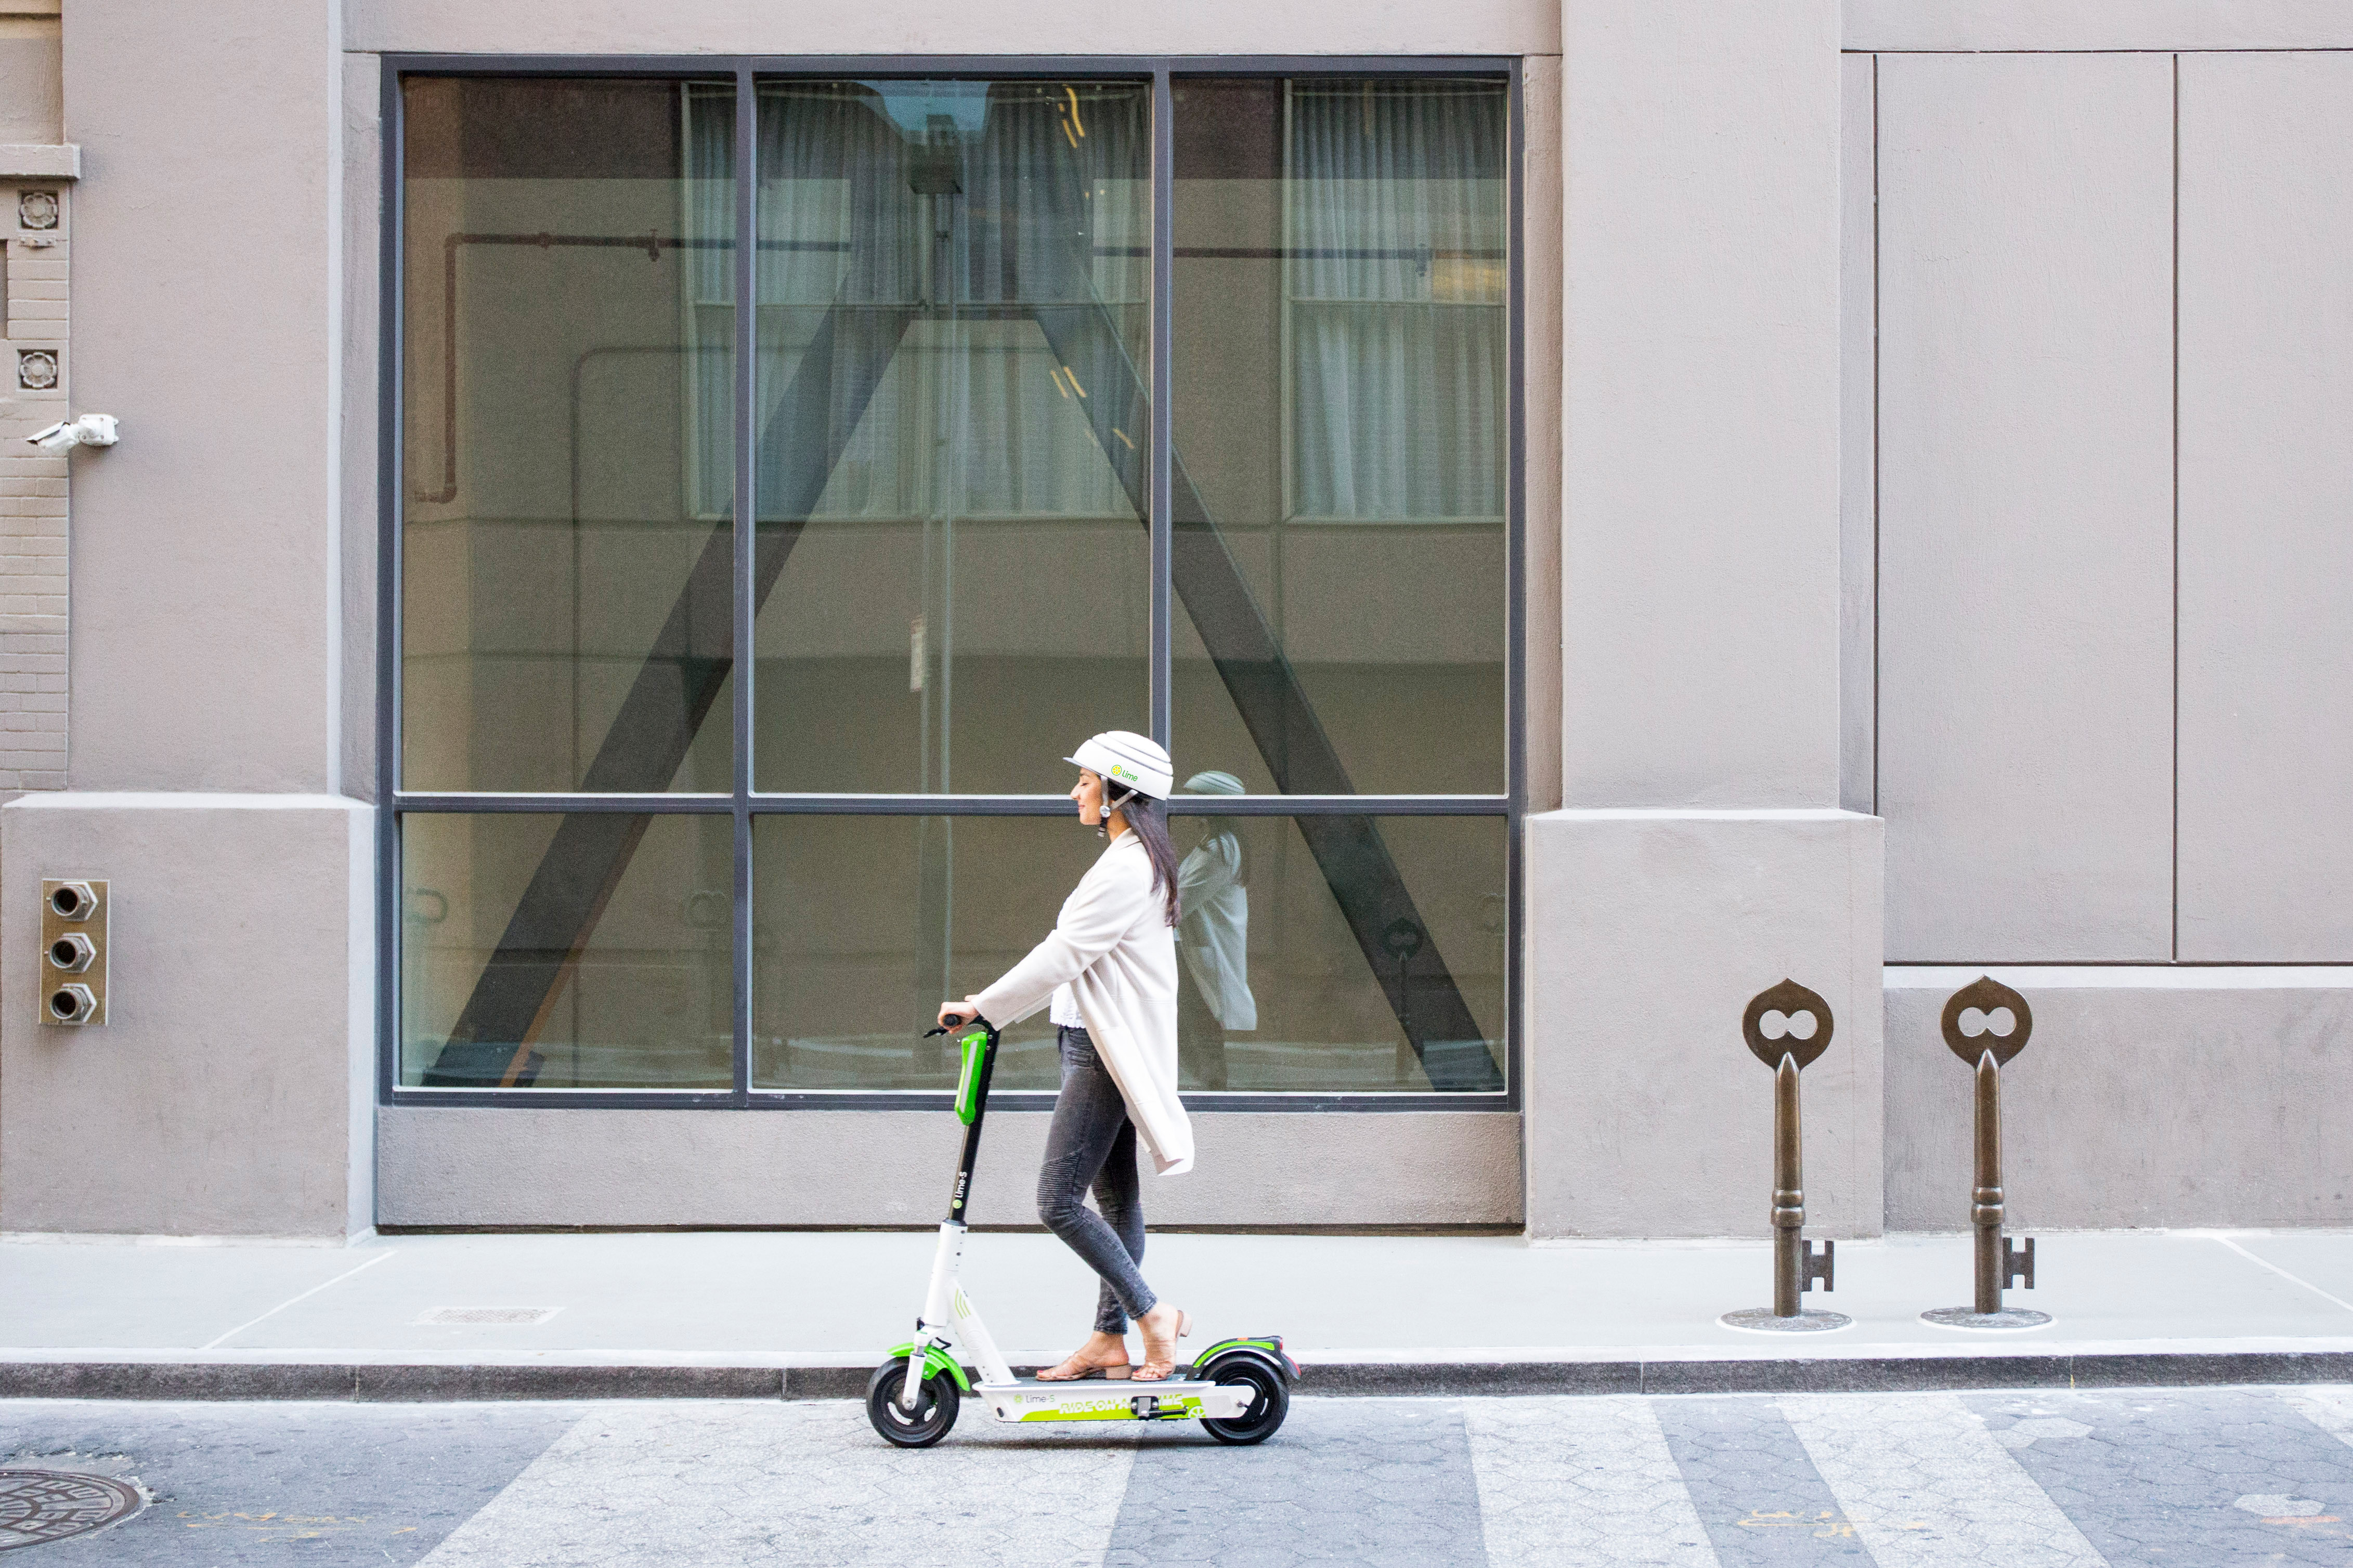 Several firms across the world offer scooters for hire (Lime/PA)